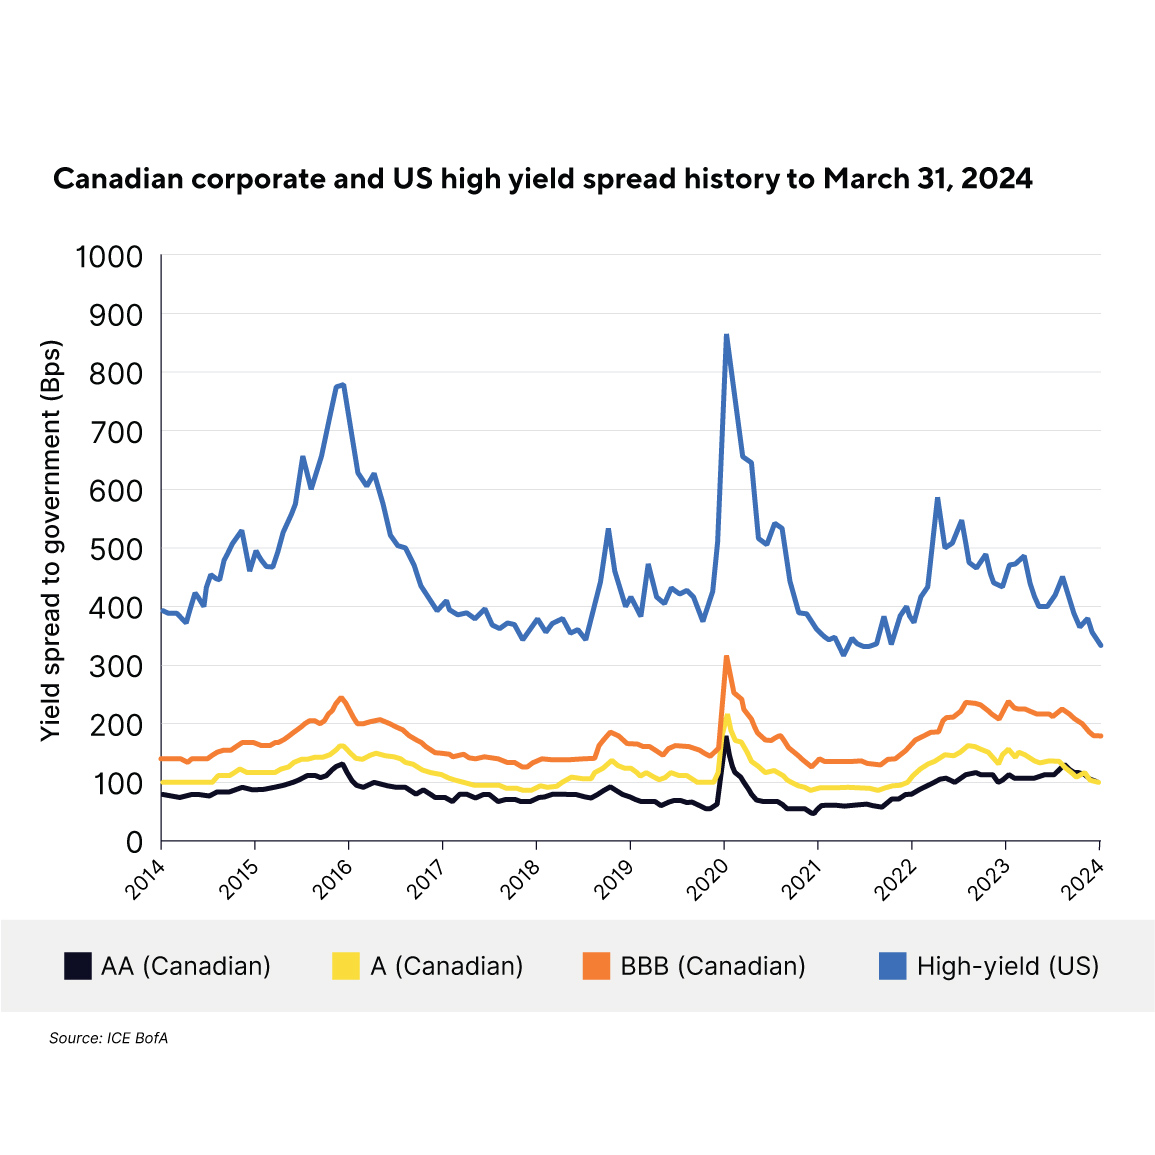 Canadian corporate and US high yield spread history to March 31, 2024